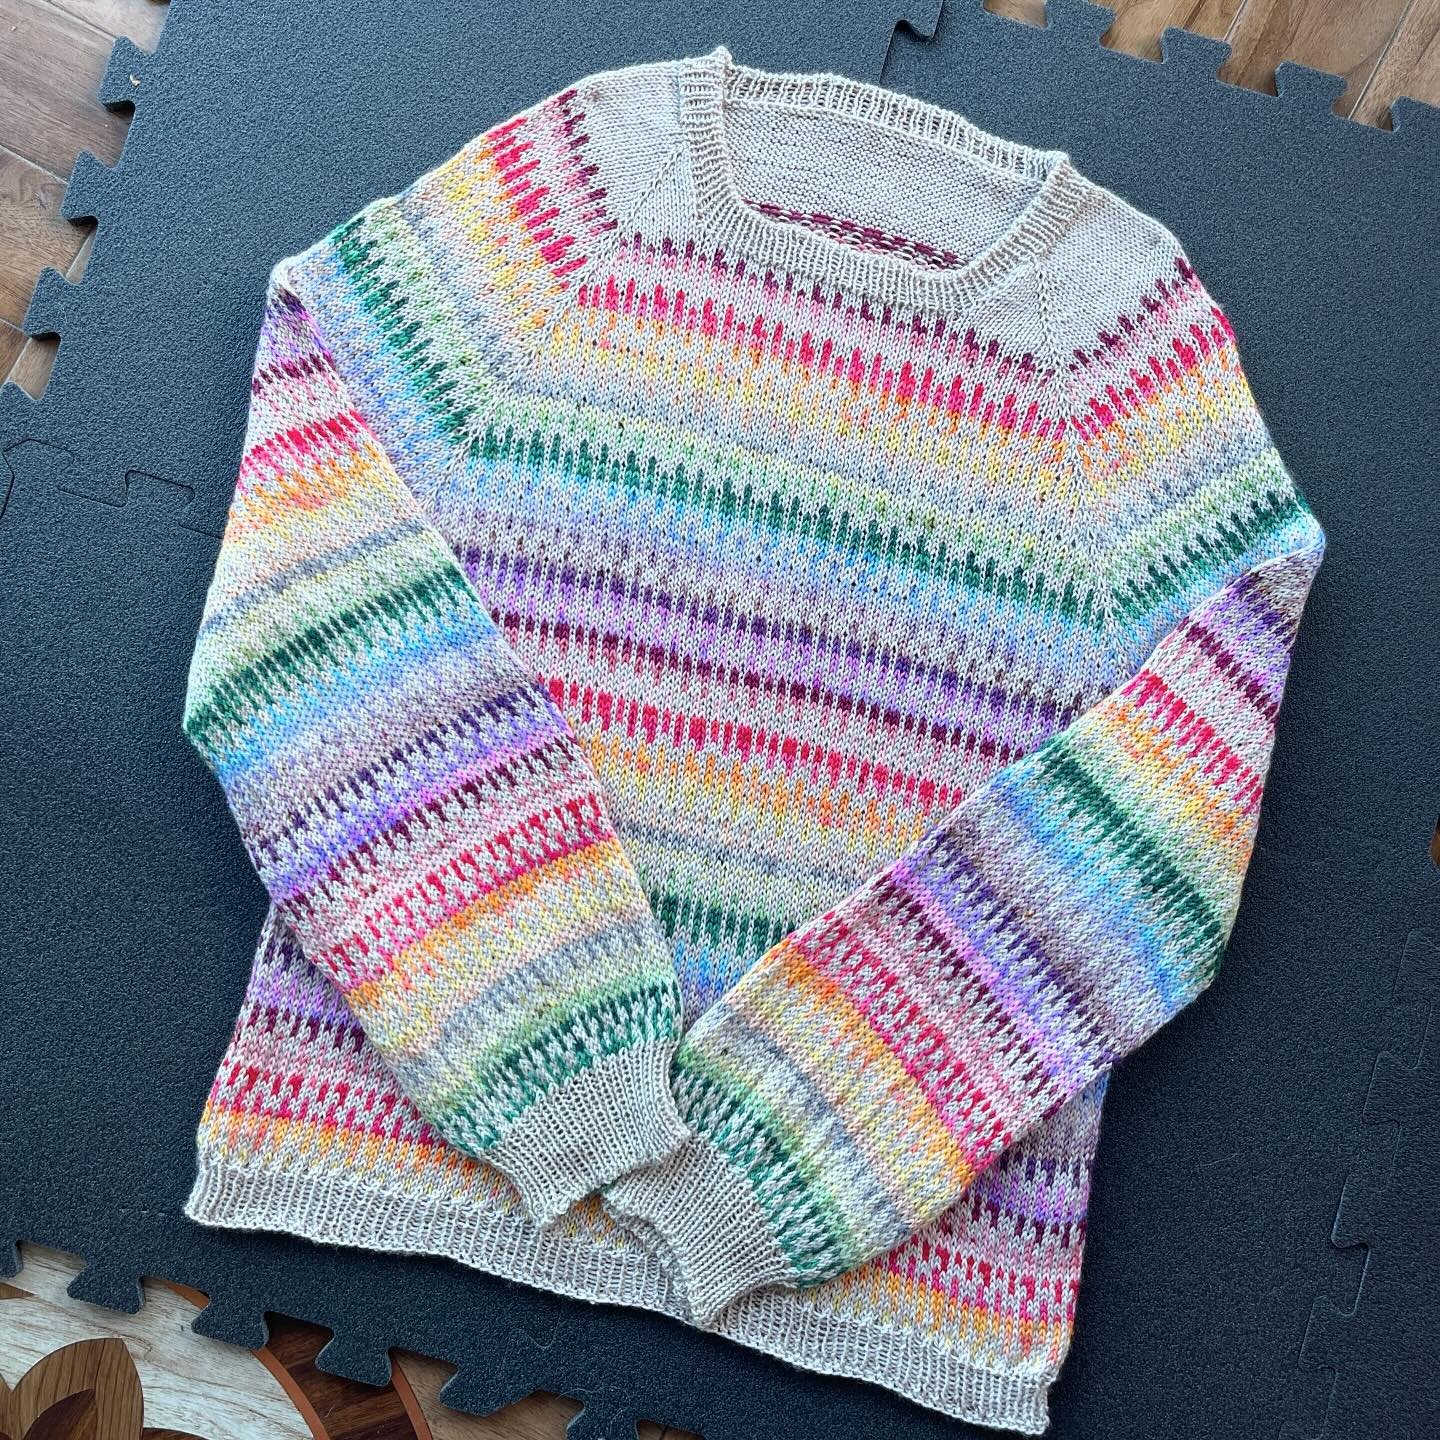 Remember everything we see on social media isn&rsquo;t necessarily what is going on underneath. 

I heard tassels were on trend this year 😂 🤠 

My 2023 advent project is complete (almost) 

It&rsquo;s Sweater 44 by @vesterbycrea and I&rsquo;m plann